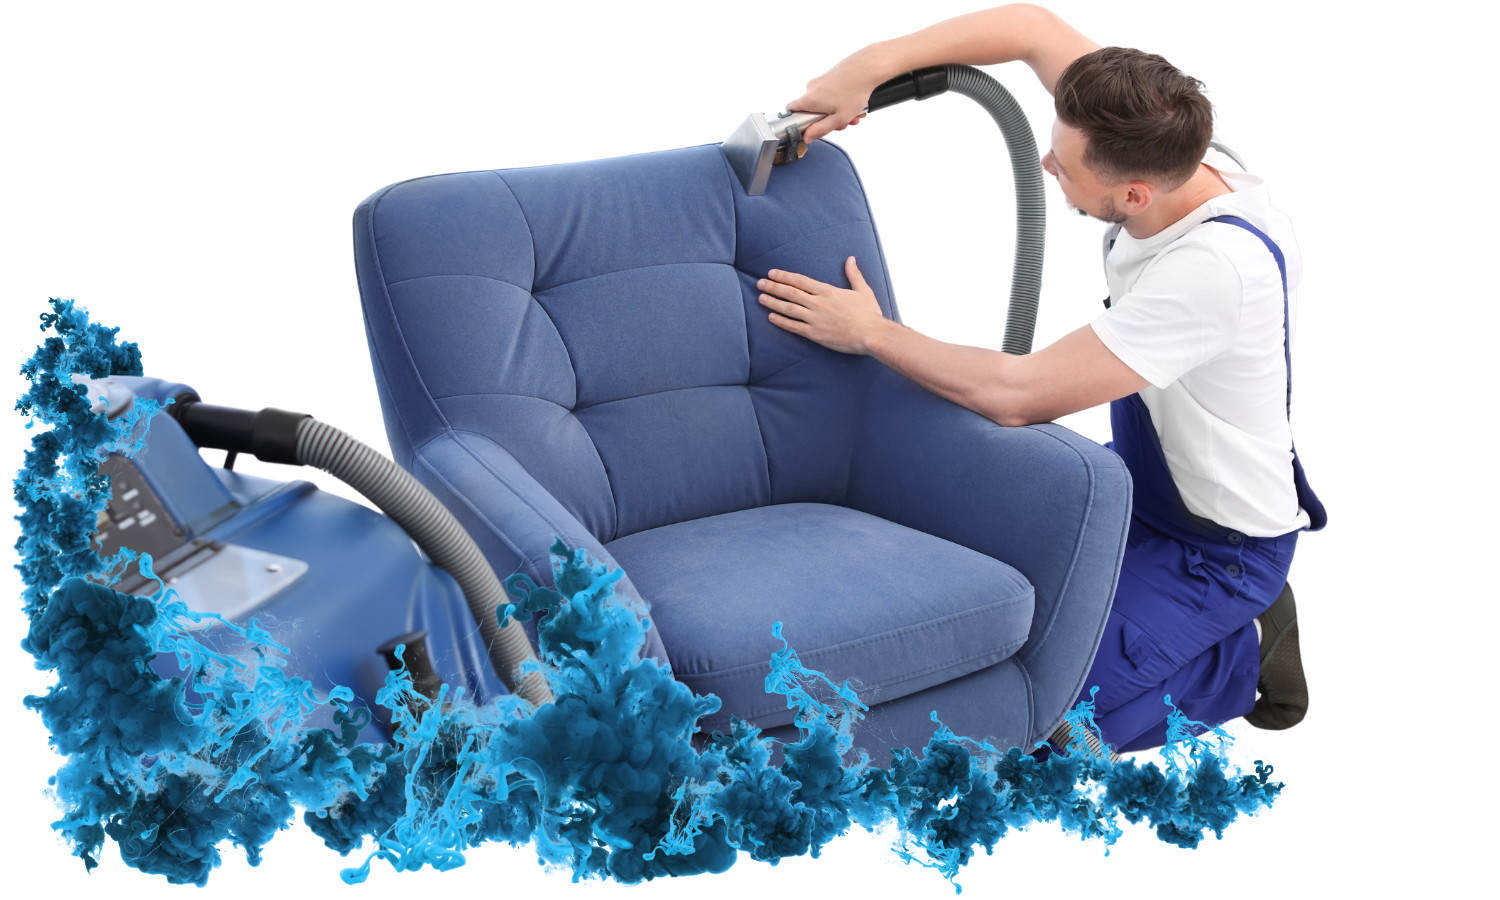 upholstery cleaning image 04